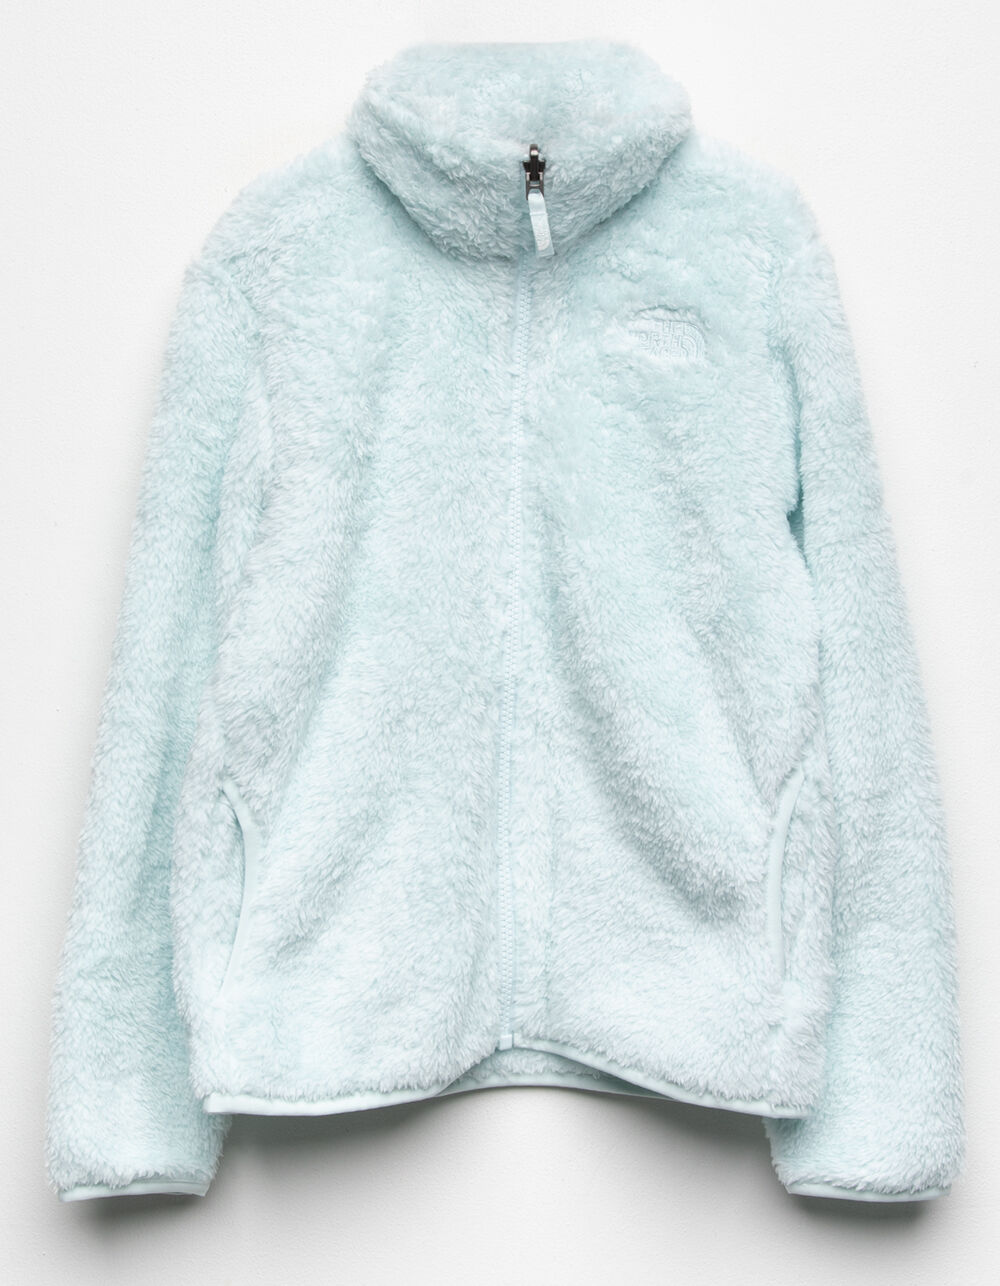 THE NORTH FACE Suave Oso Girls Jacket - LIGHT BLUE | Tillys